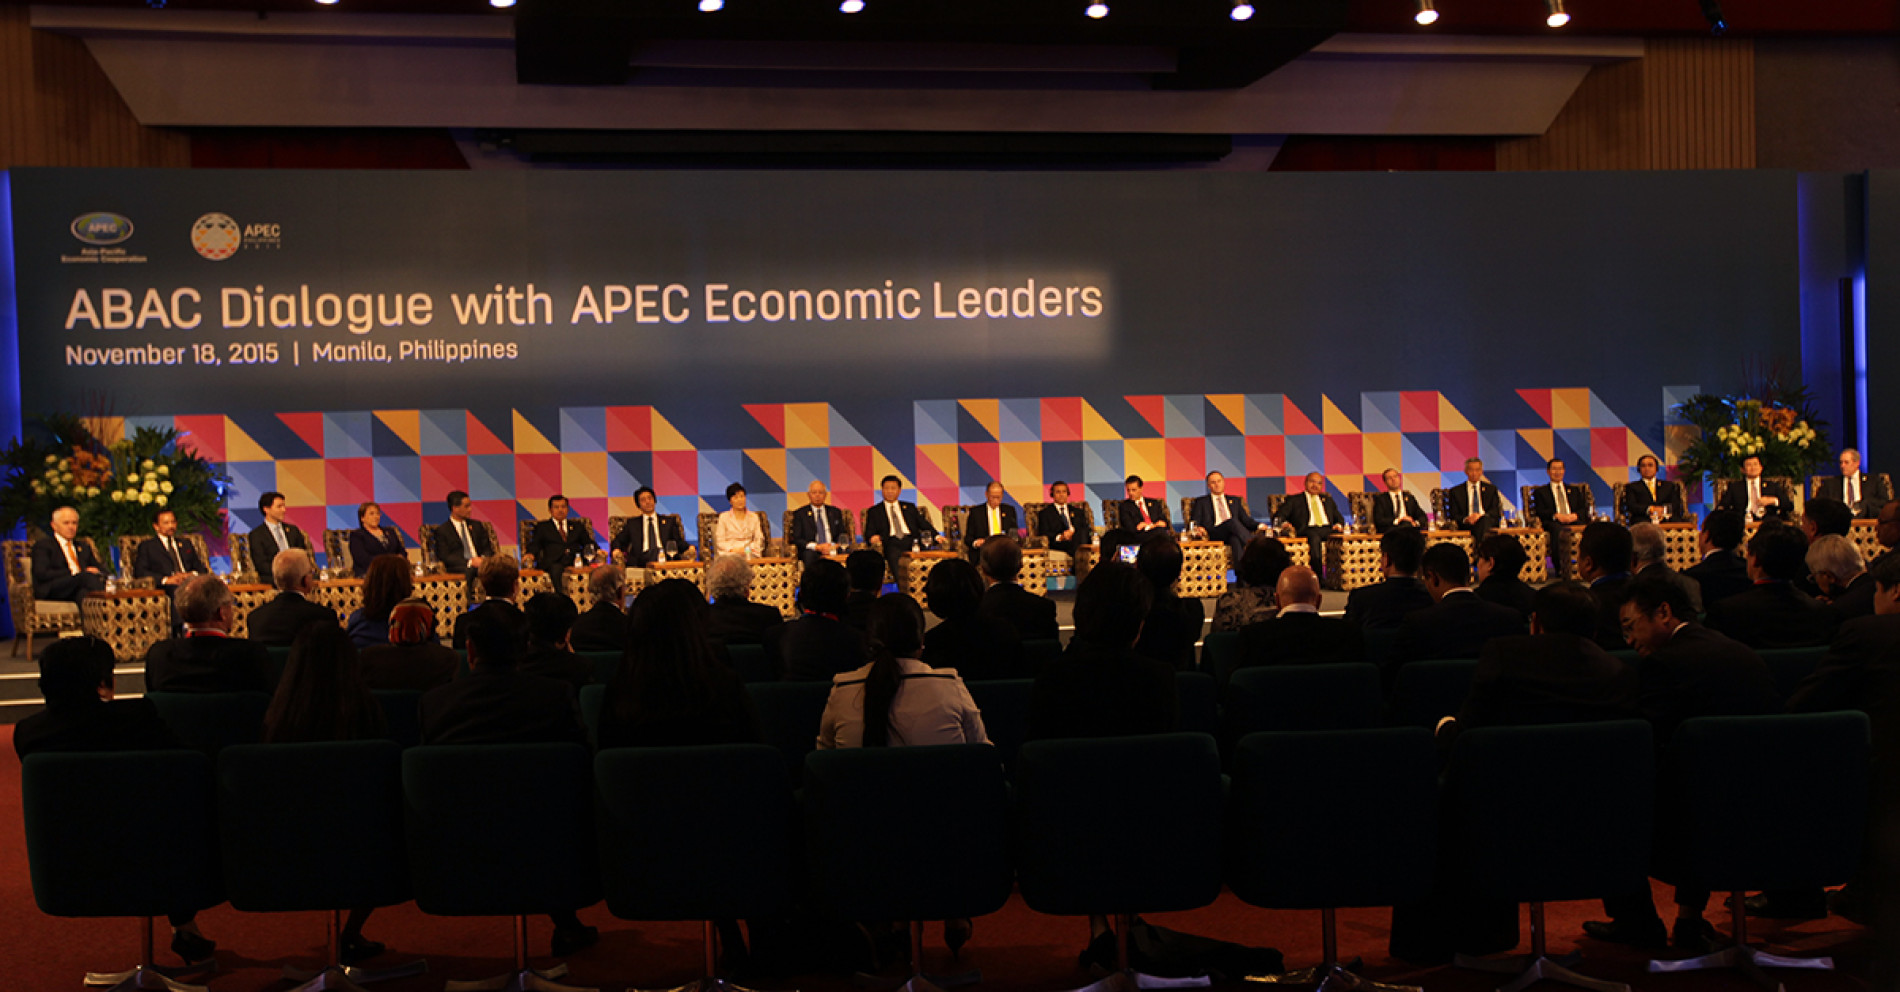 President Aquino welcomes APEC leaders at the 2015 ABAC dialogue